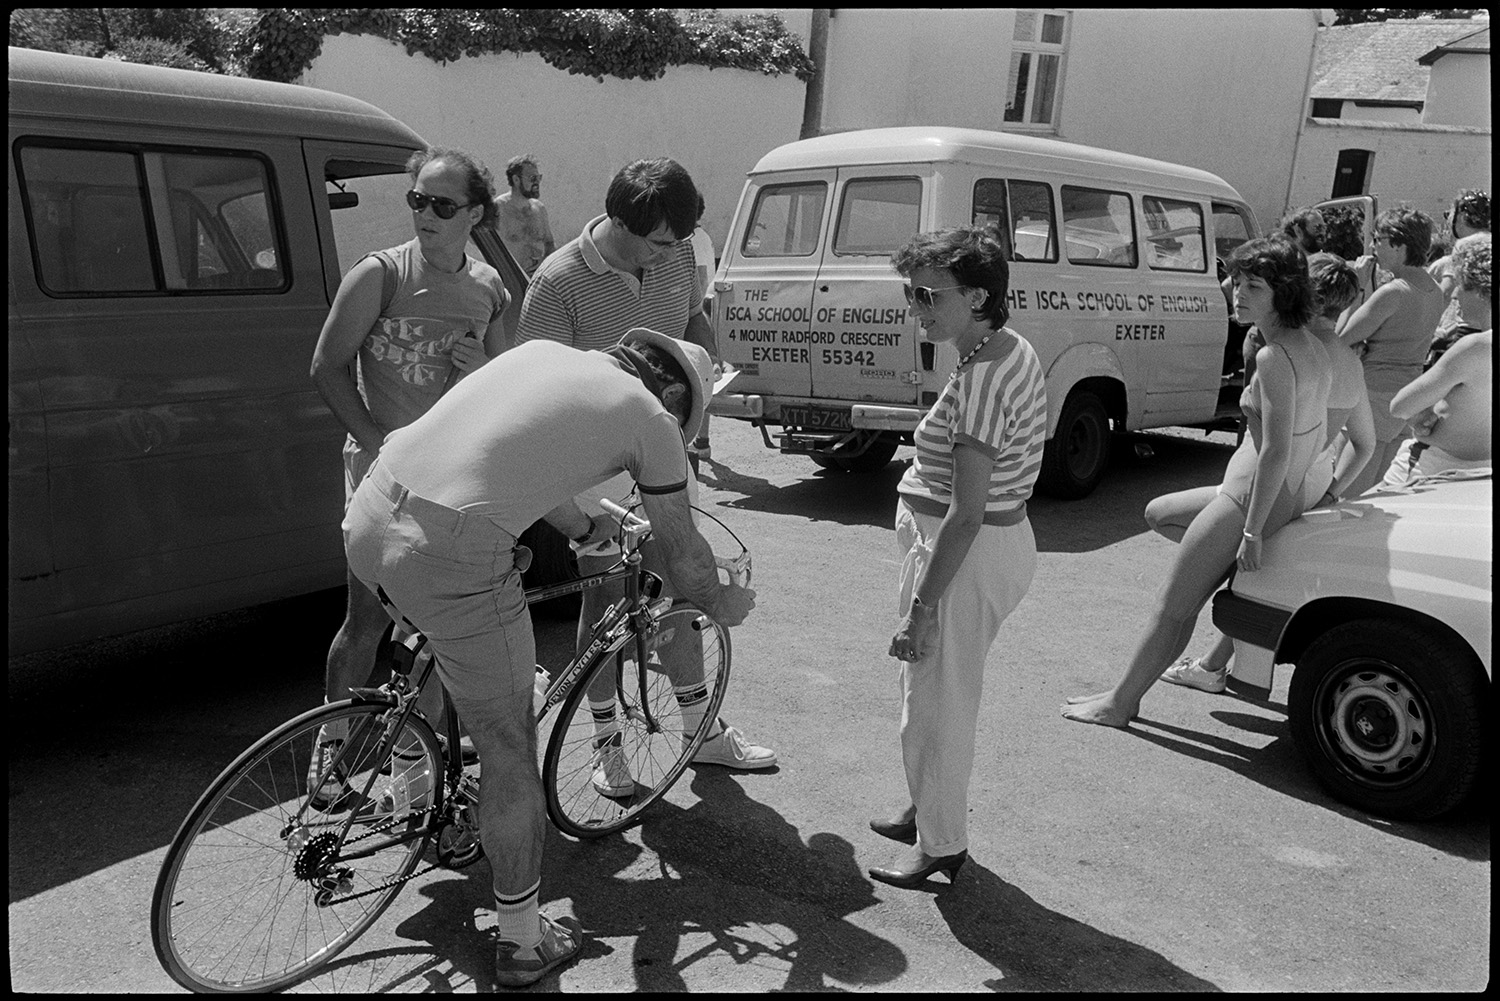 Street scenes, bicycles, people mending car.
[People gathered in Fore Street, Dolton for a bicycle event. A person is on a bicycle in the foreground. A minibus from the ISCA School of English is parked in the background.]